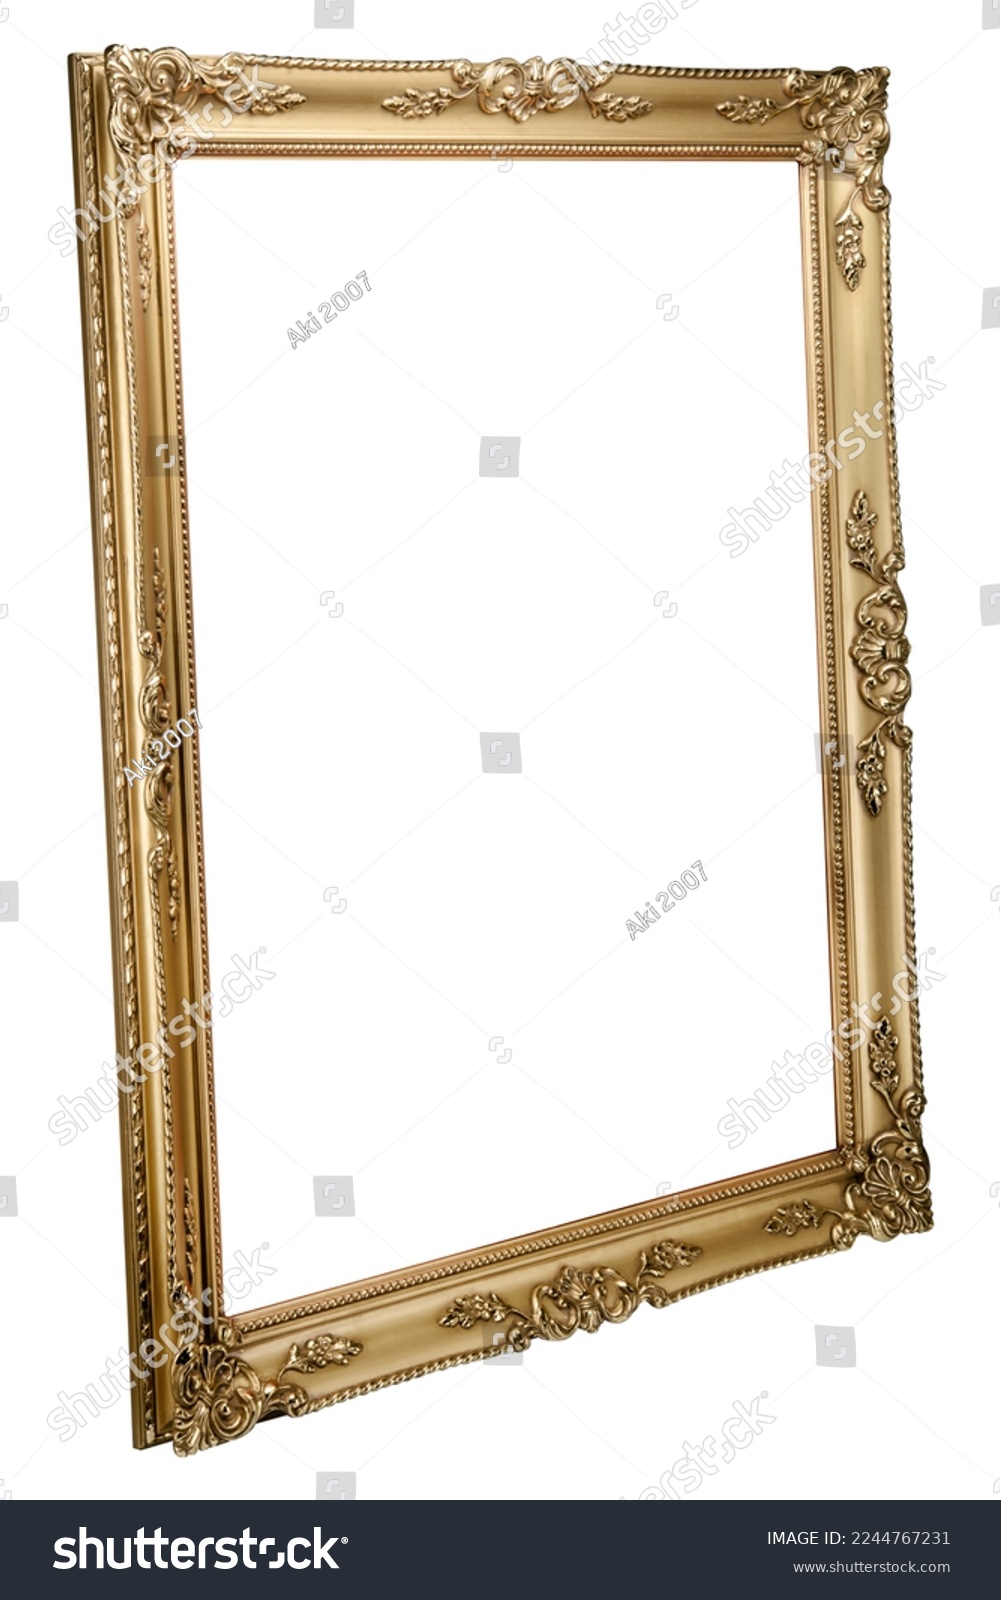 Perspective view of Antique Golden Classic Old Vintage Wooden Rectangle canvas frame isolated on white. Blank and diverse subject moulding baguette. Design element for paint, mirror or photo #2244767231